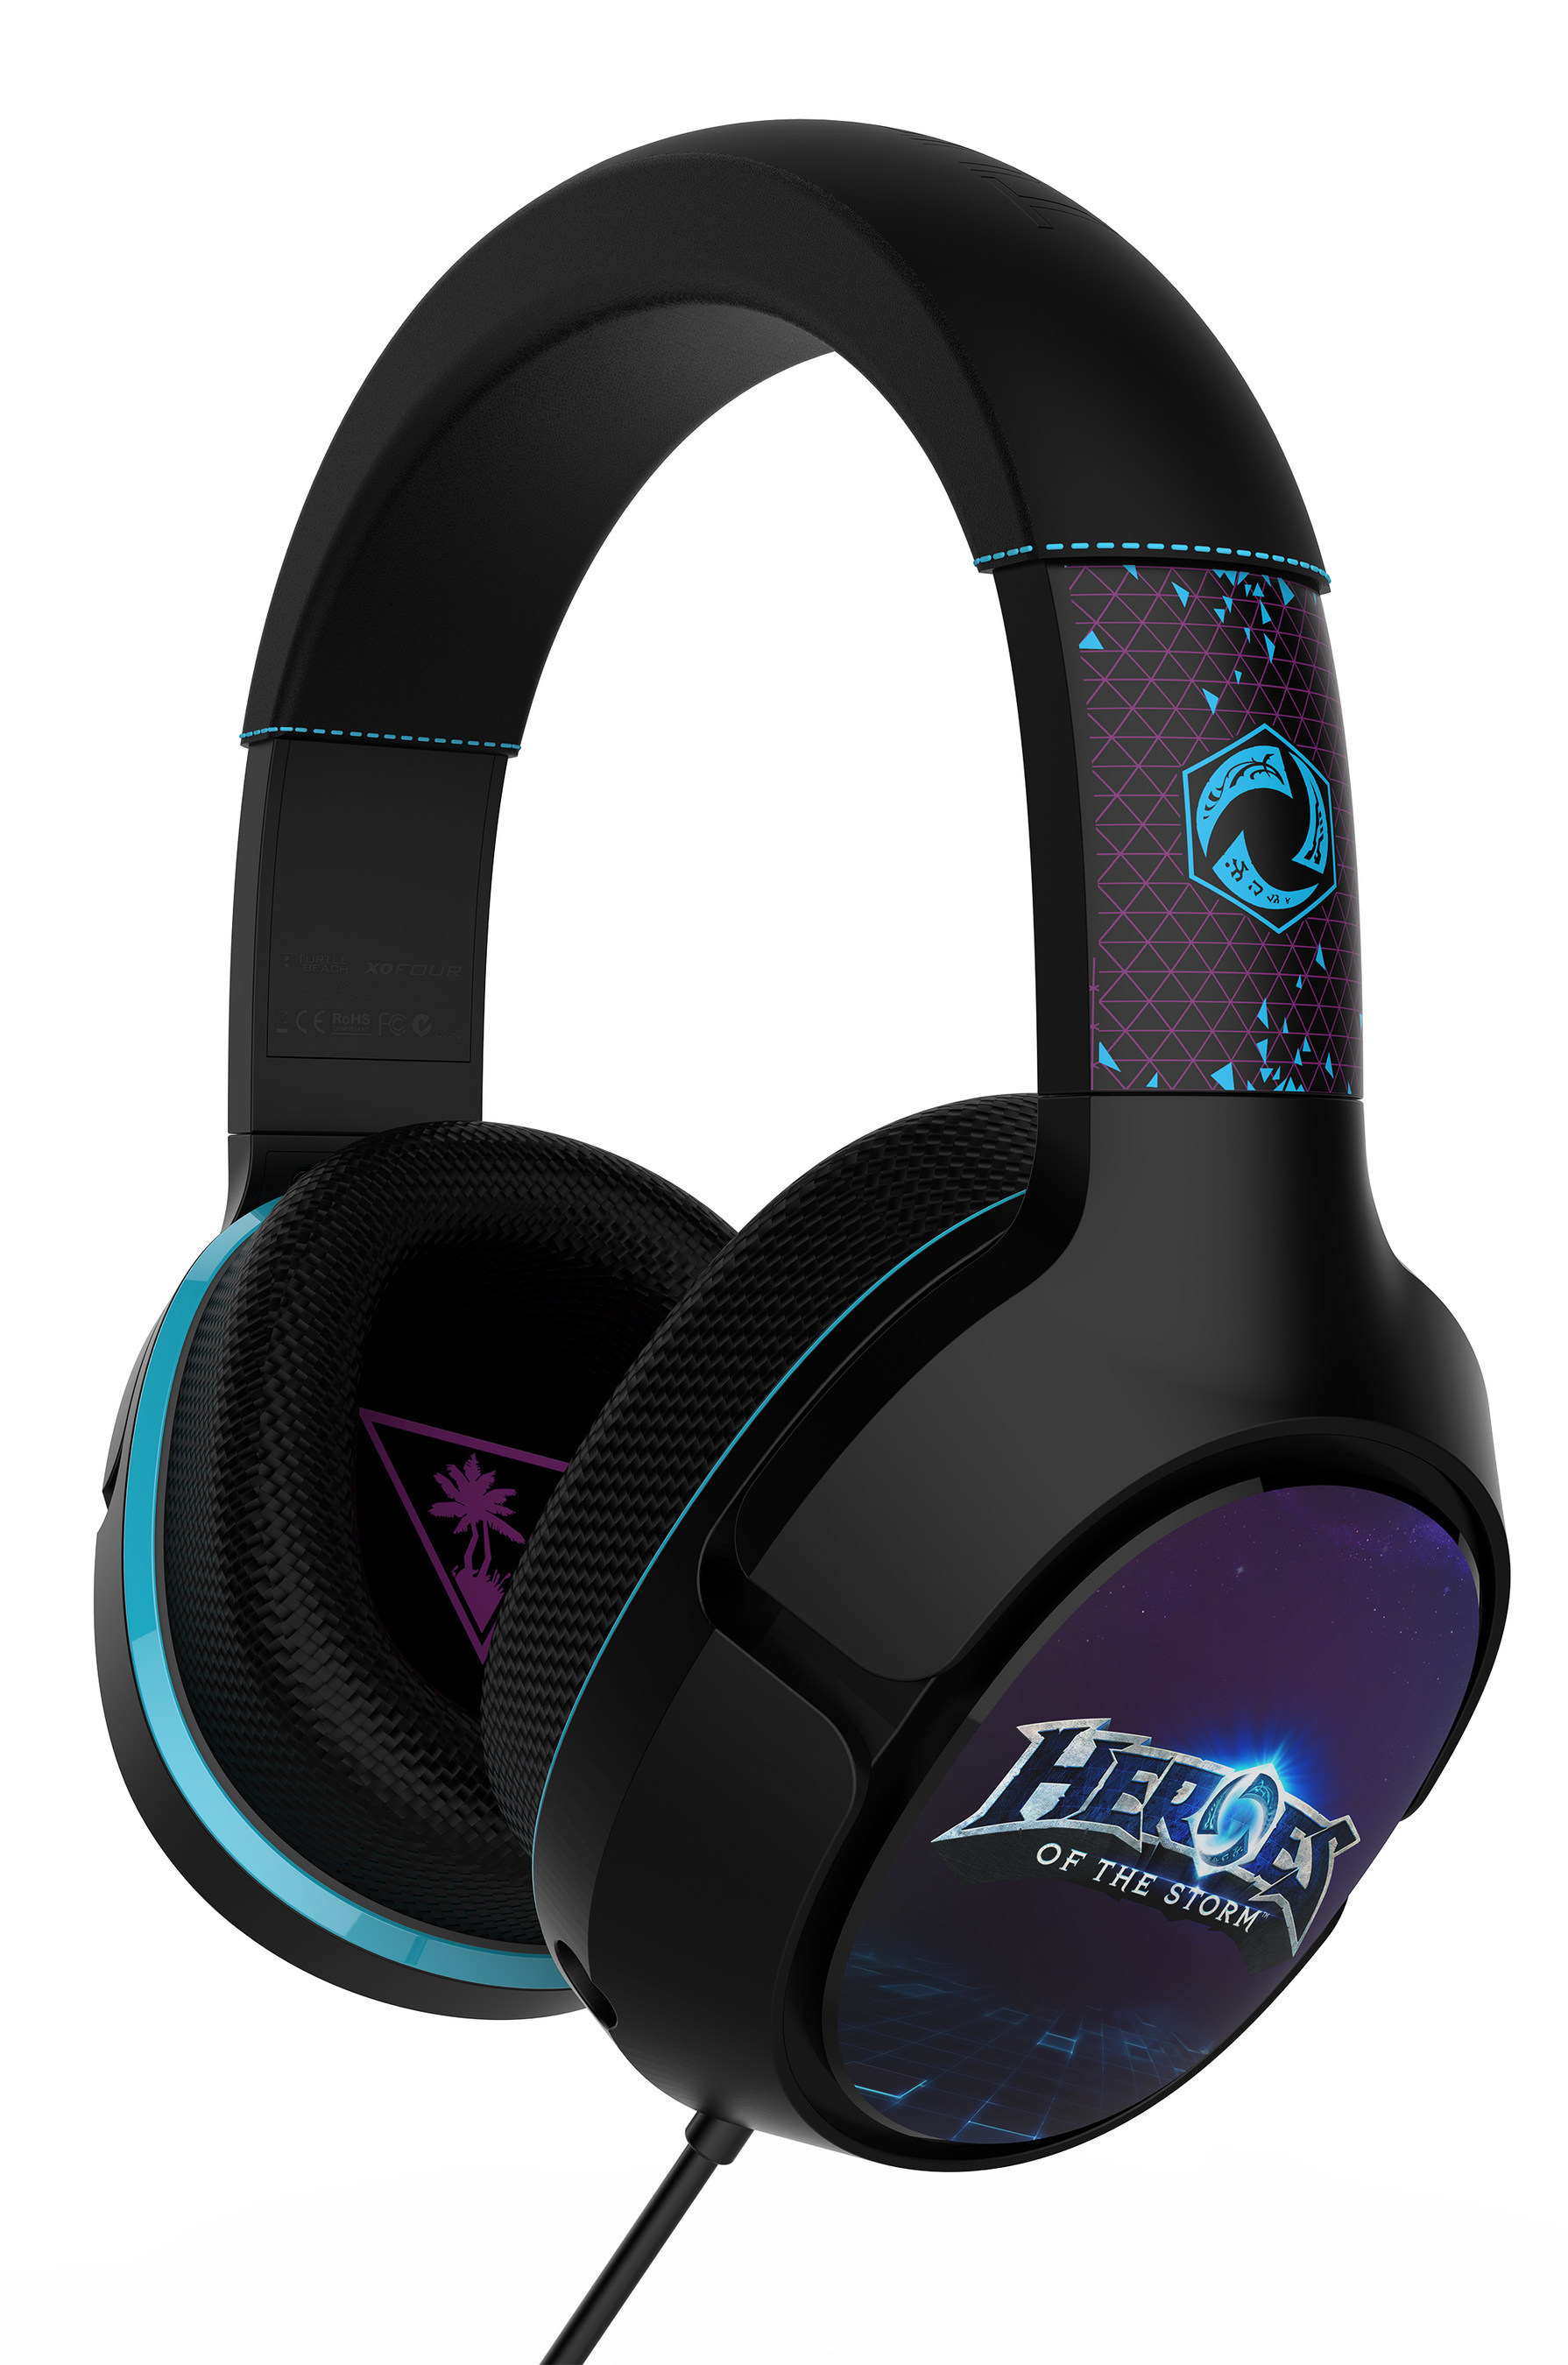 The new Heroes of the Storm(TM)  stereo PC gaming headset features swappable speaker plates with different Blizzard characters, perfect for players eager to personalize their headset.